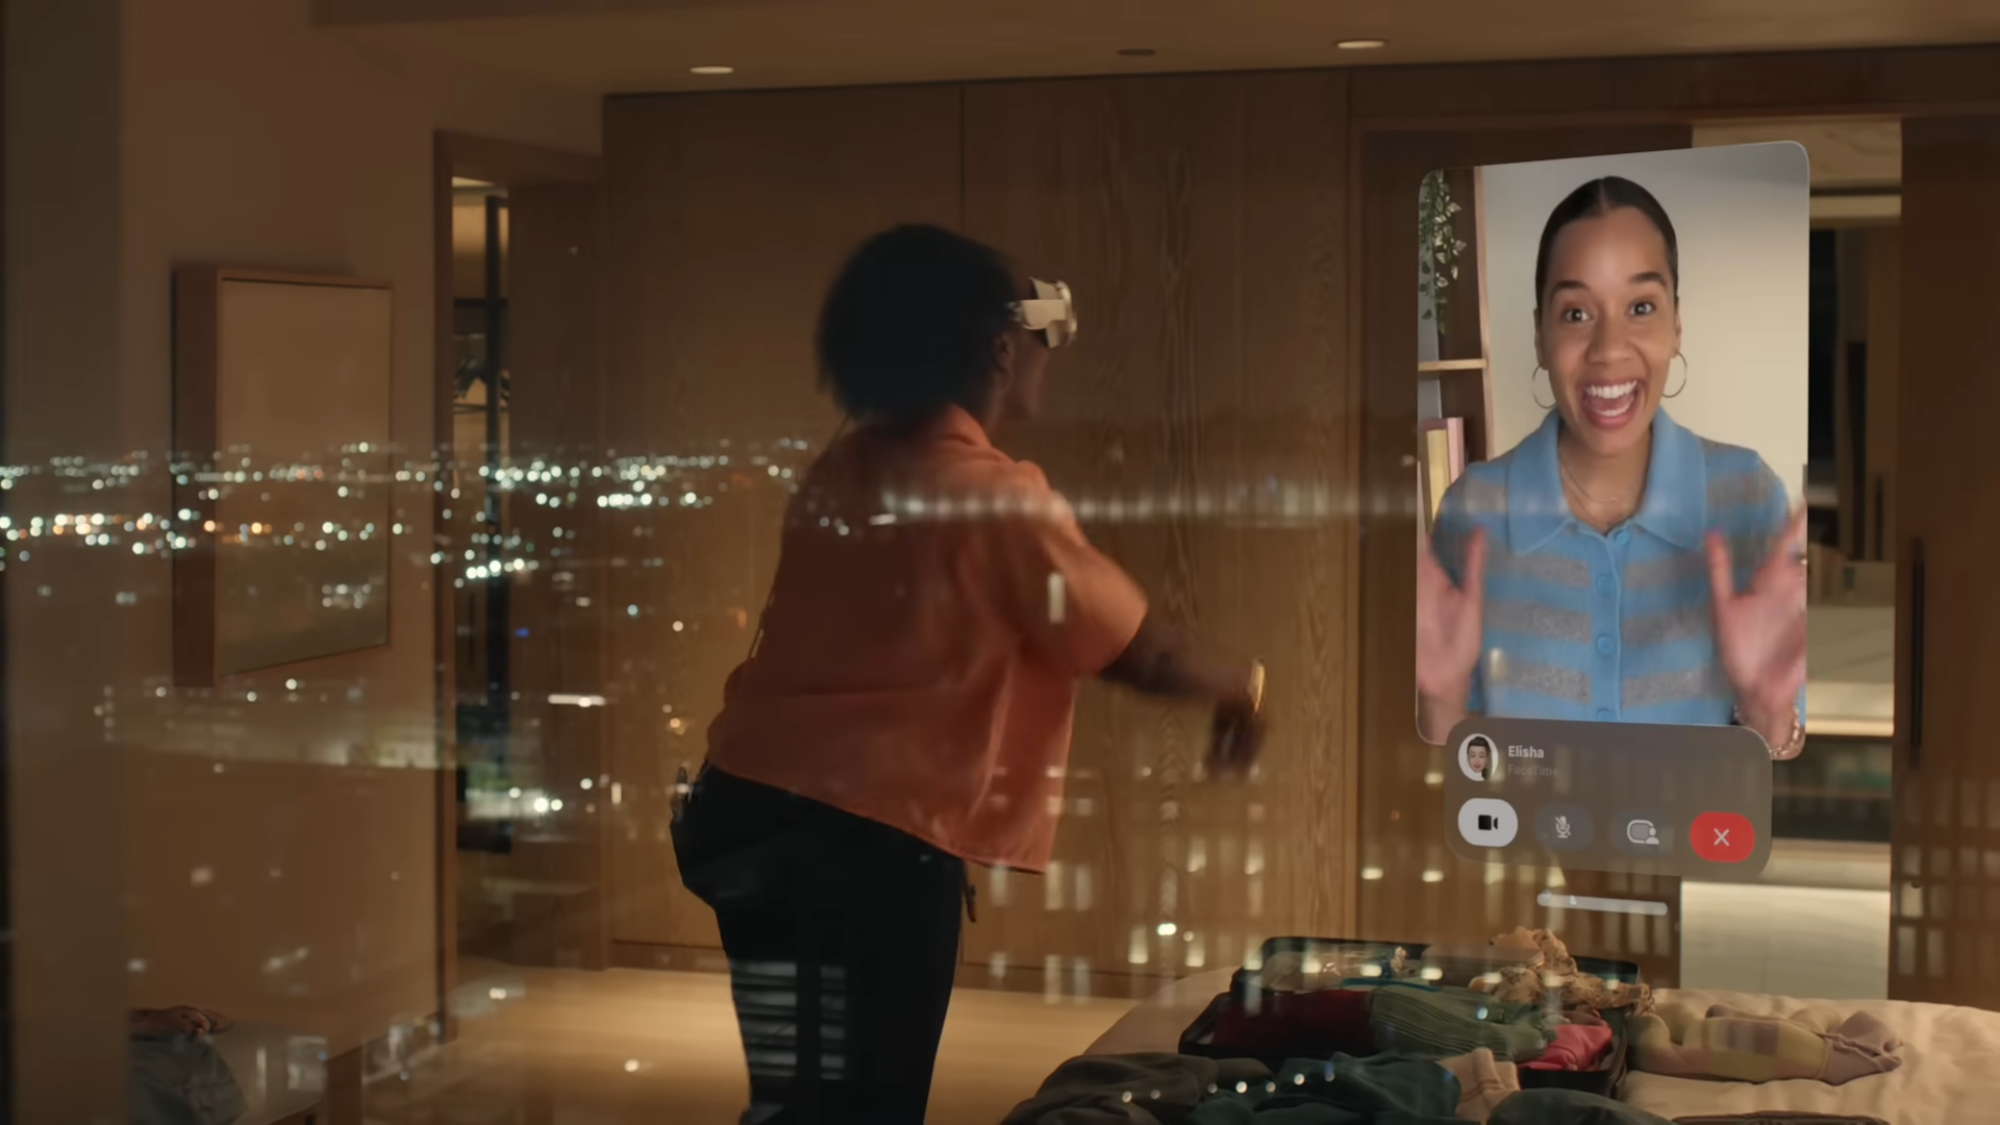 Video chatting inside the Apple Vision Pro